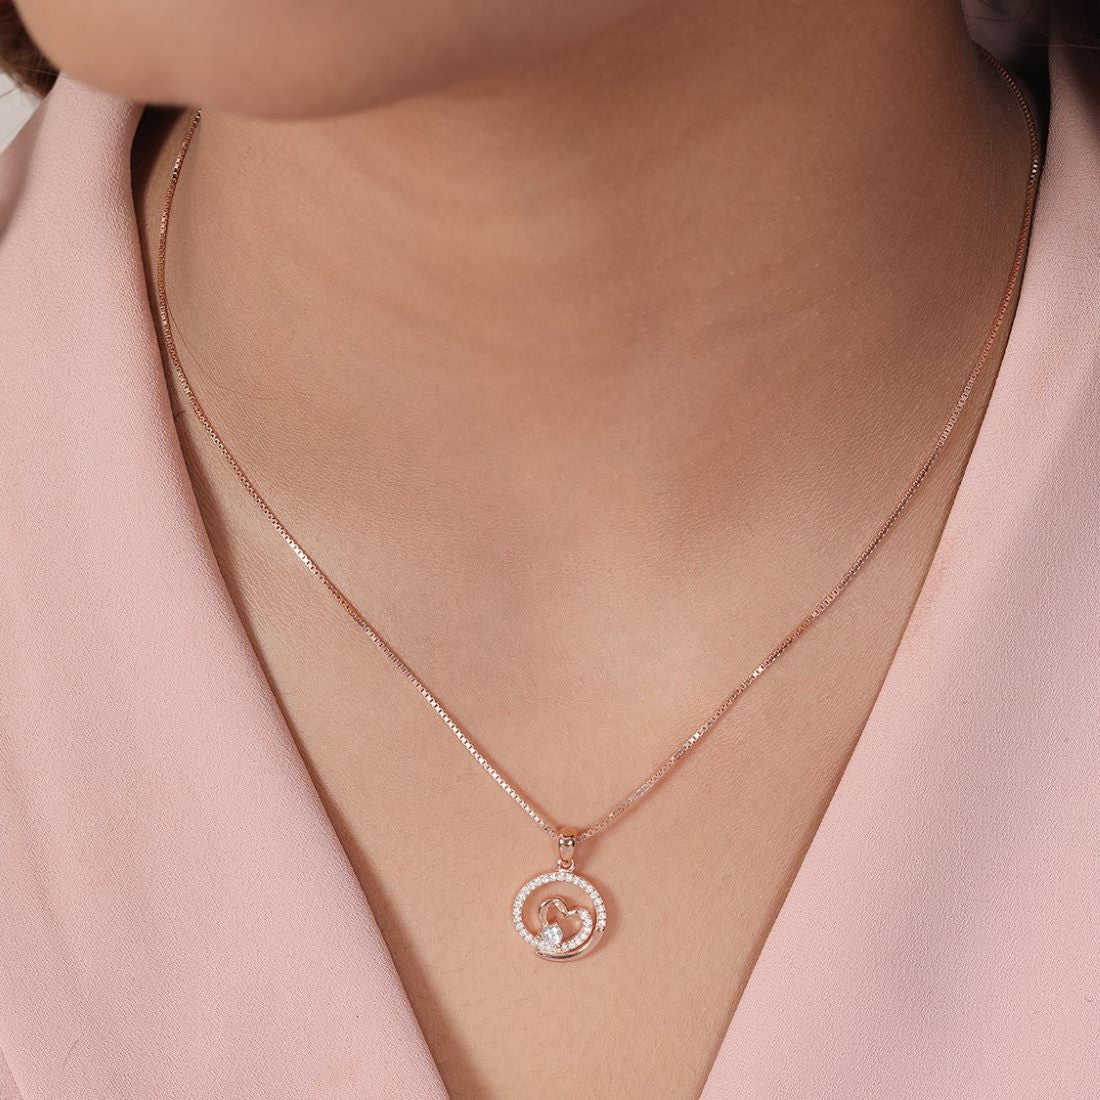 Eternal Love Rose Gold Plated 925 Sterling Silver Pendant